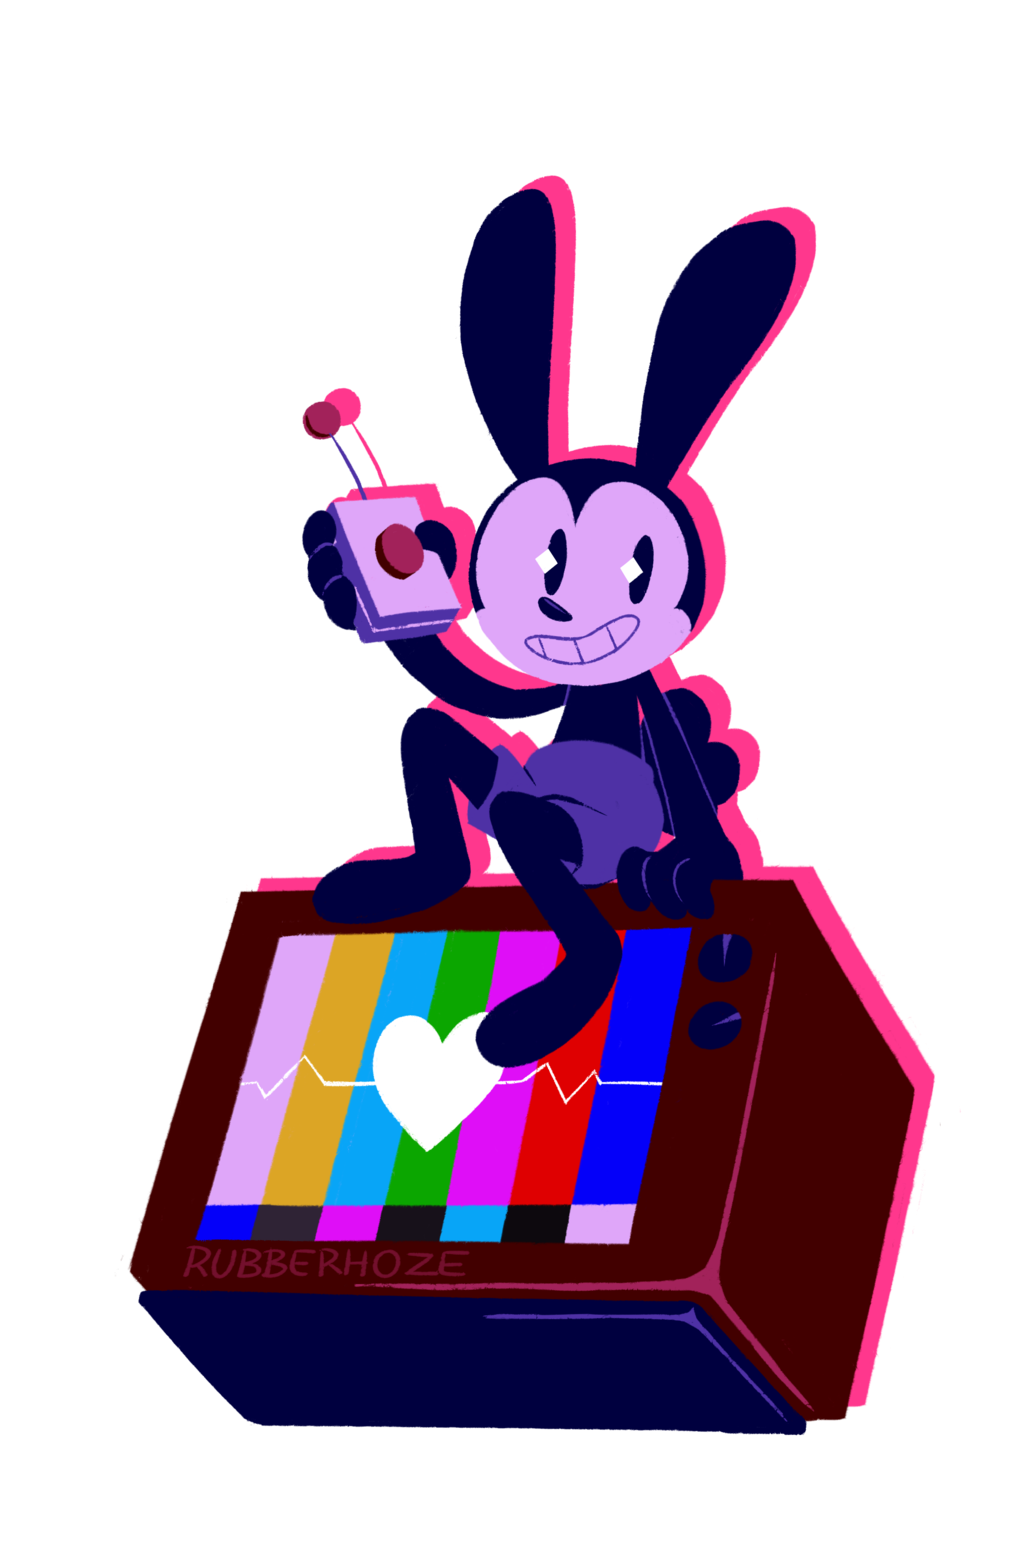 Oswald The Lucky Rabbit PNG HD and Transparent pngteam.com